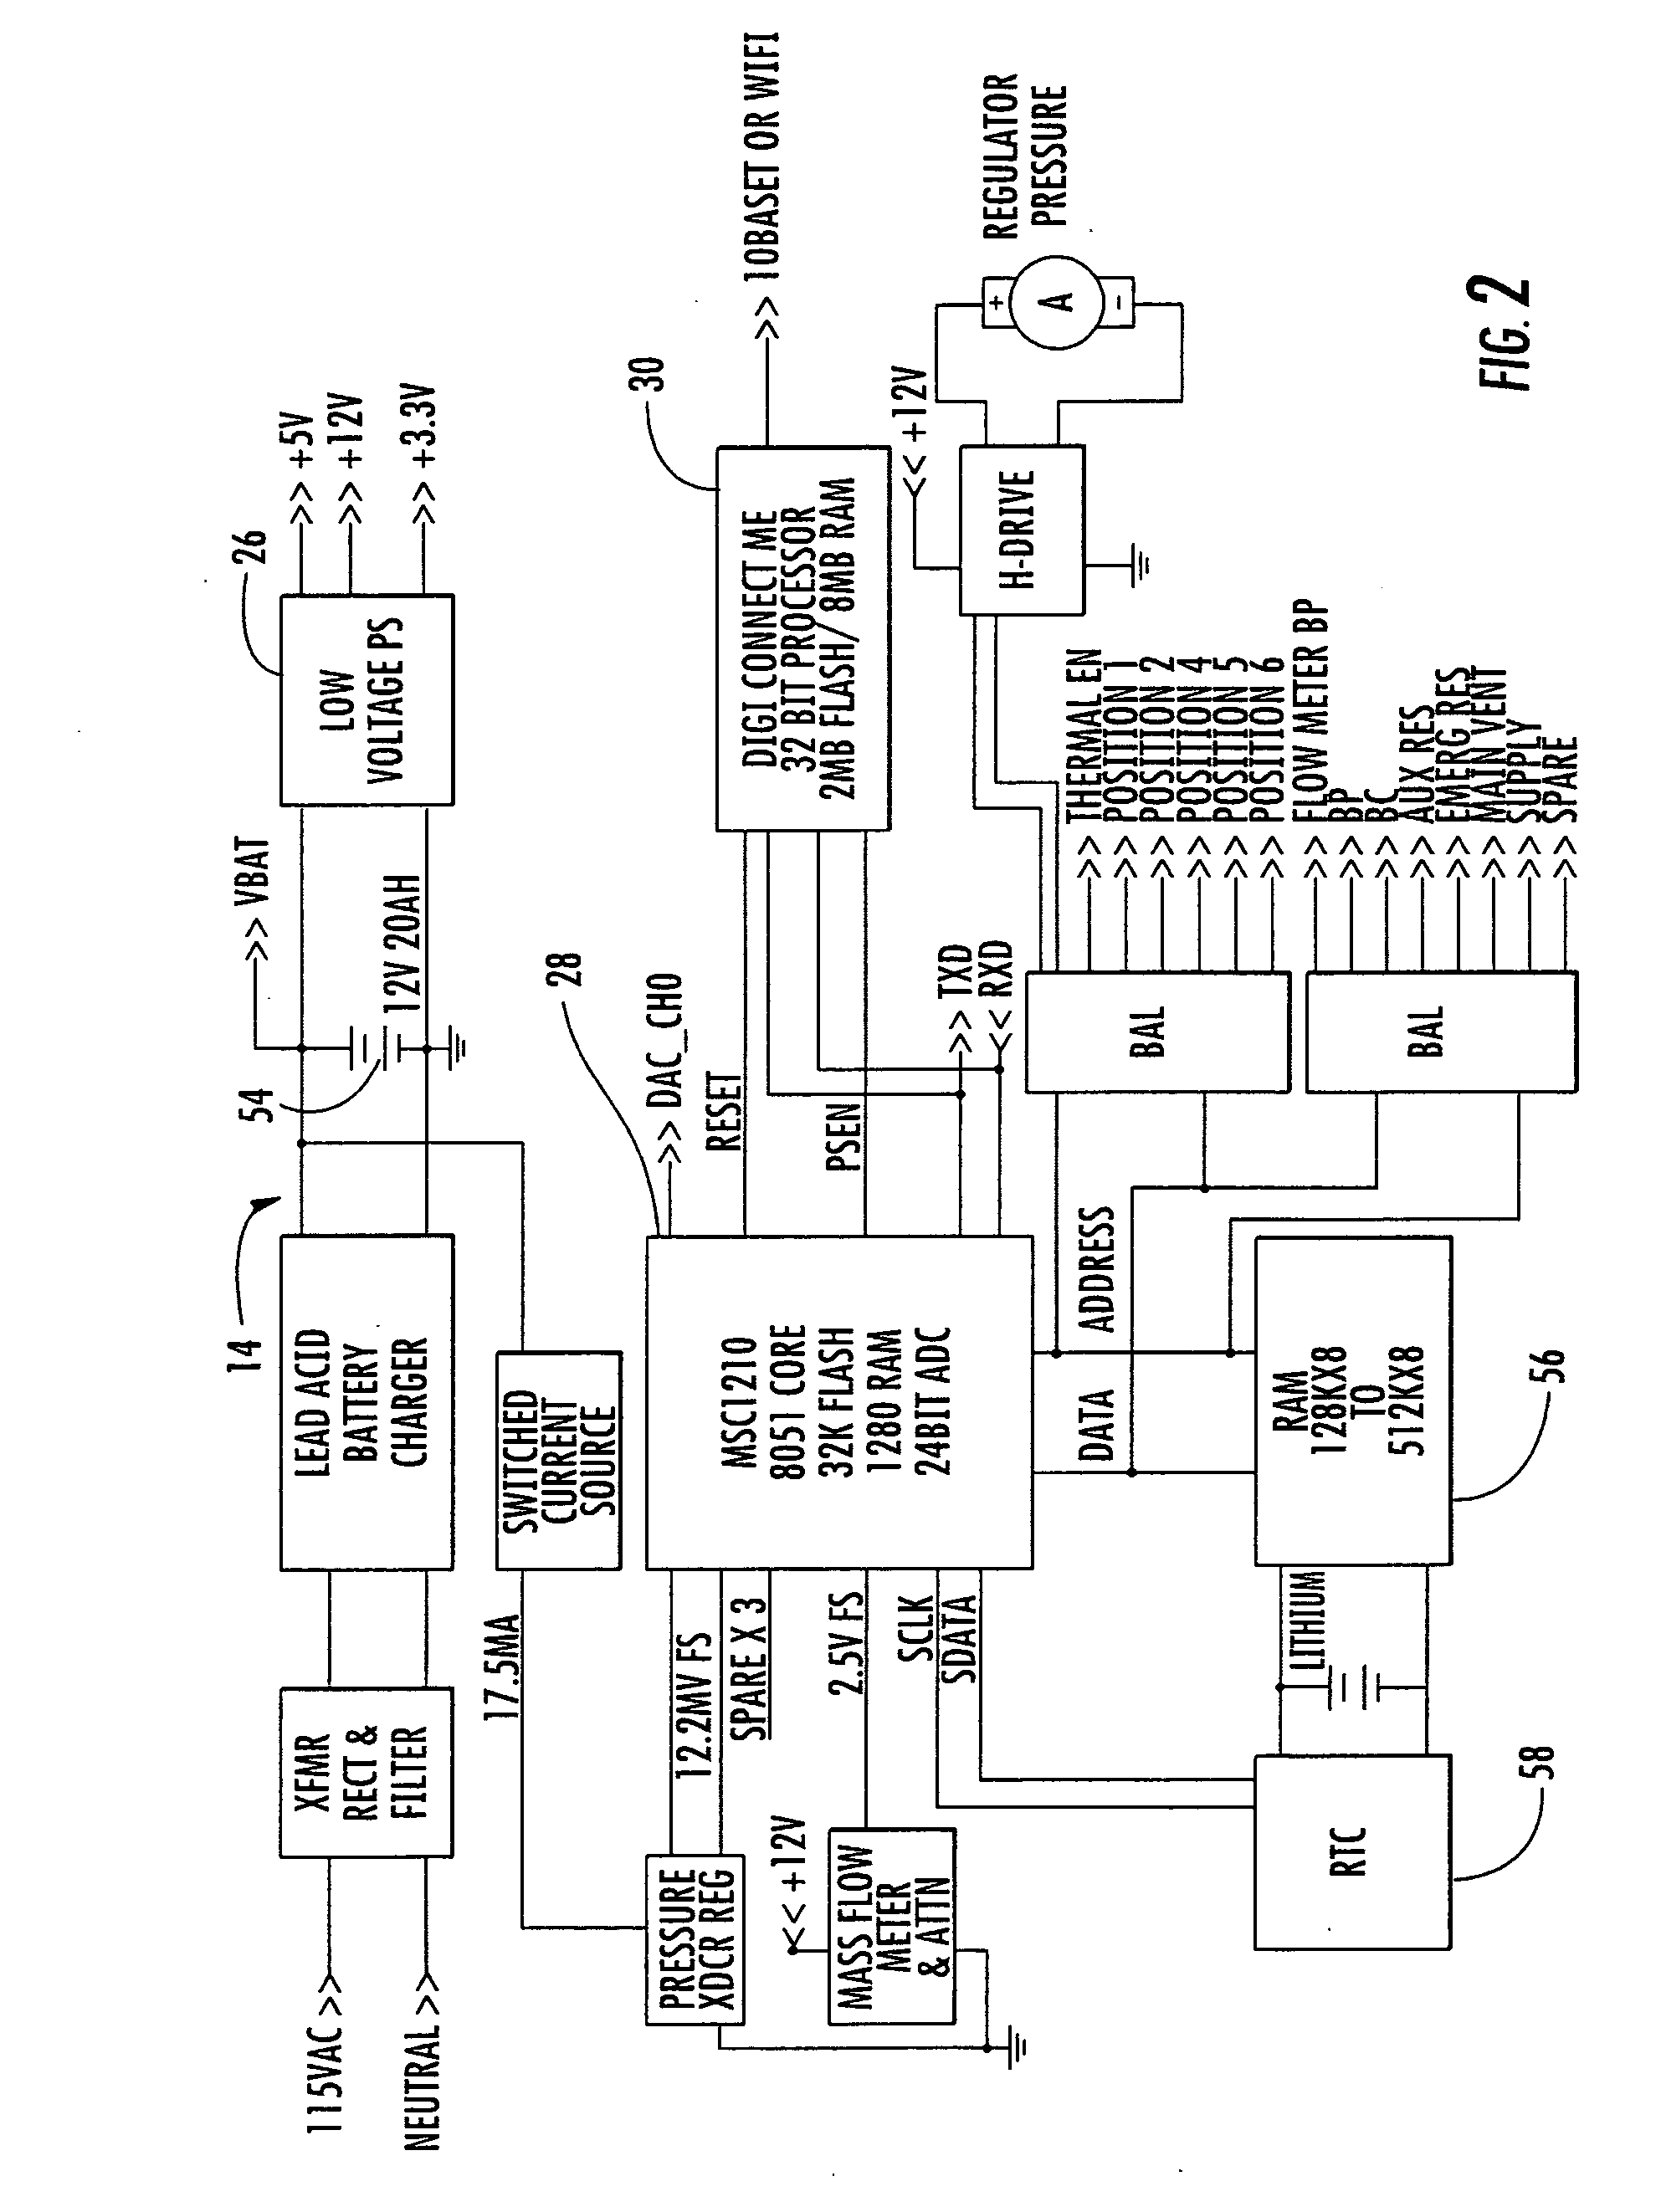 Test device and method for testing a rail car brake system